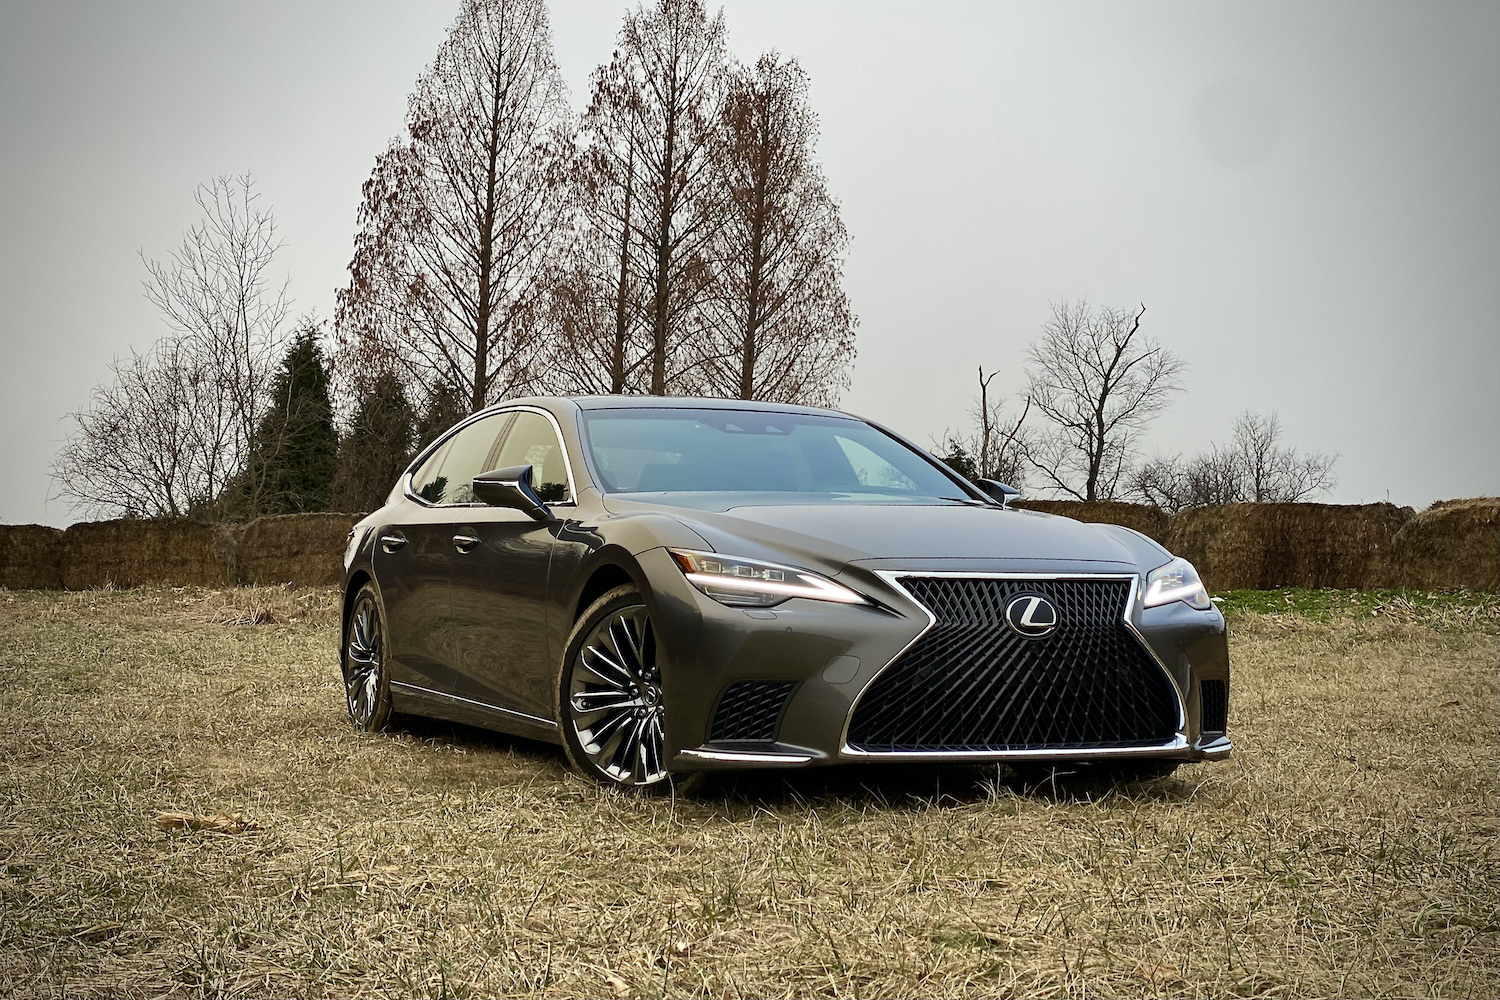 The 2021 Lexus LS500's front end from passenger's side with trees in the back on a grassy field.